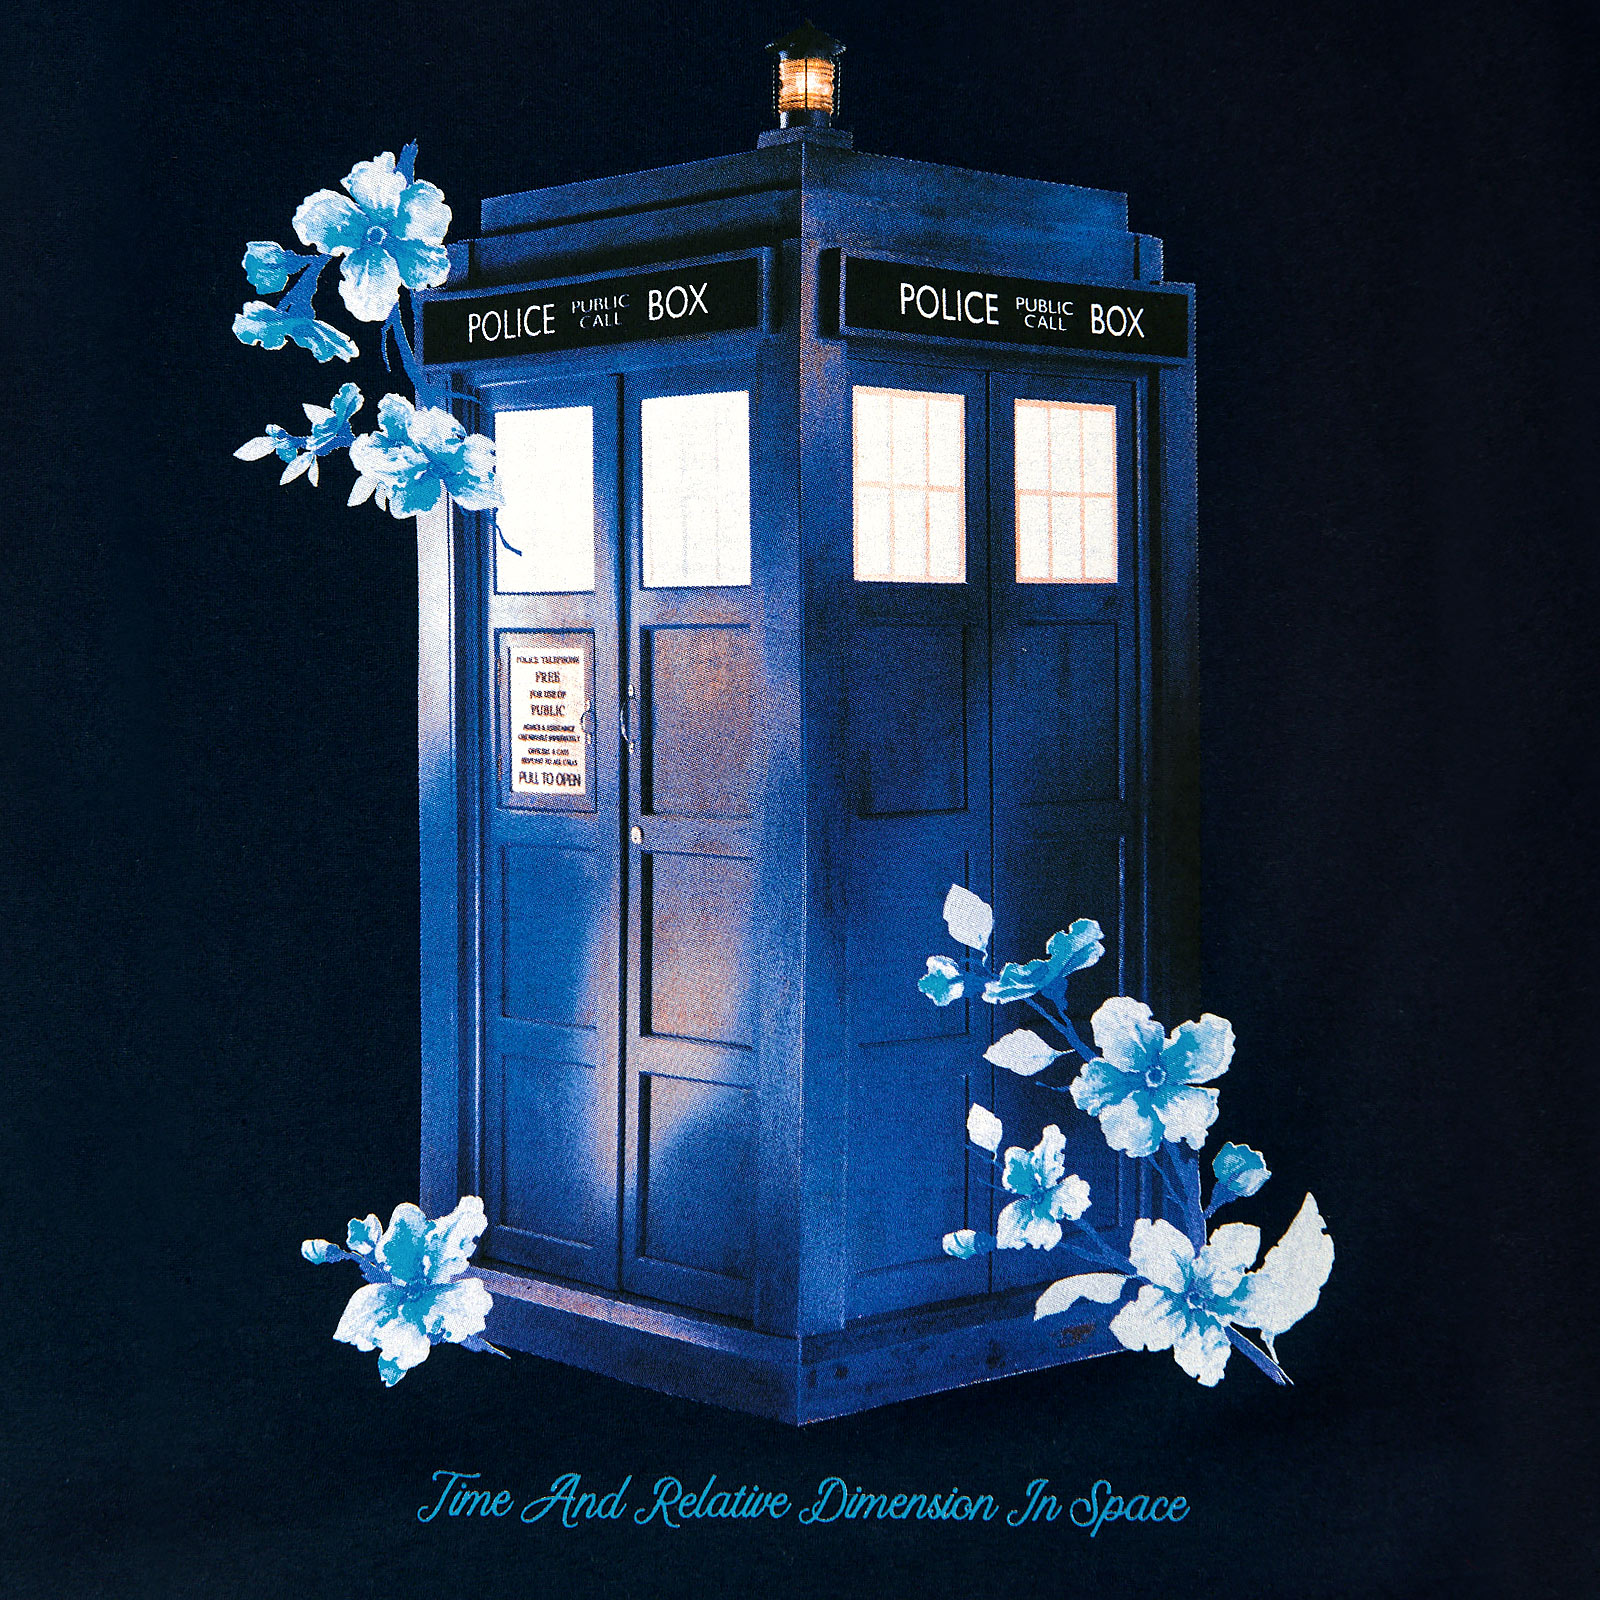 Doctor Who - Floral Tardis Dames T-Shirt Blauw